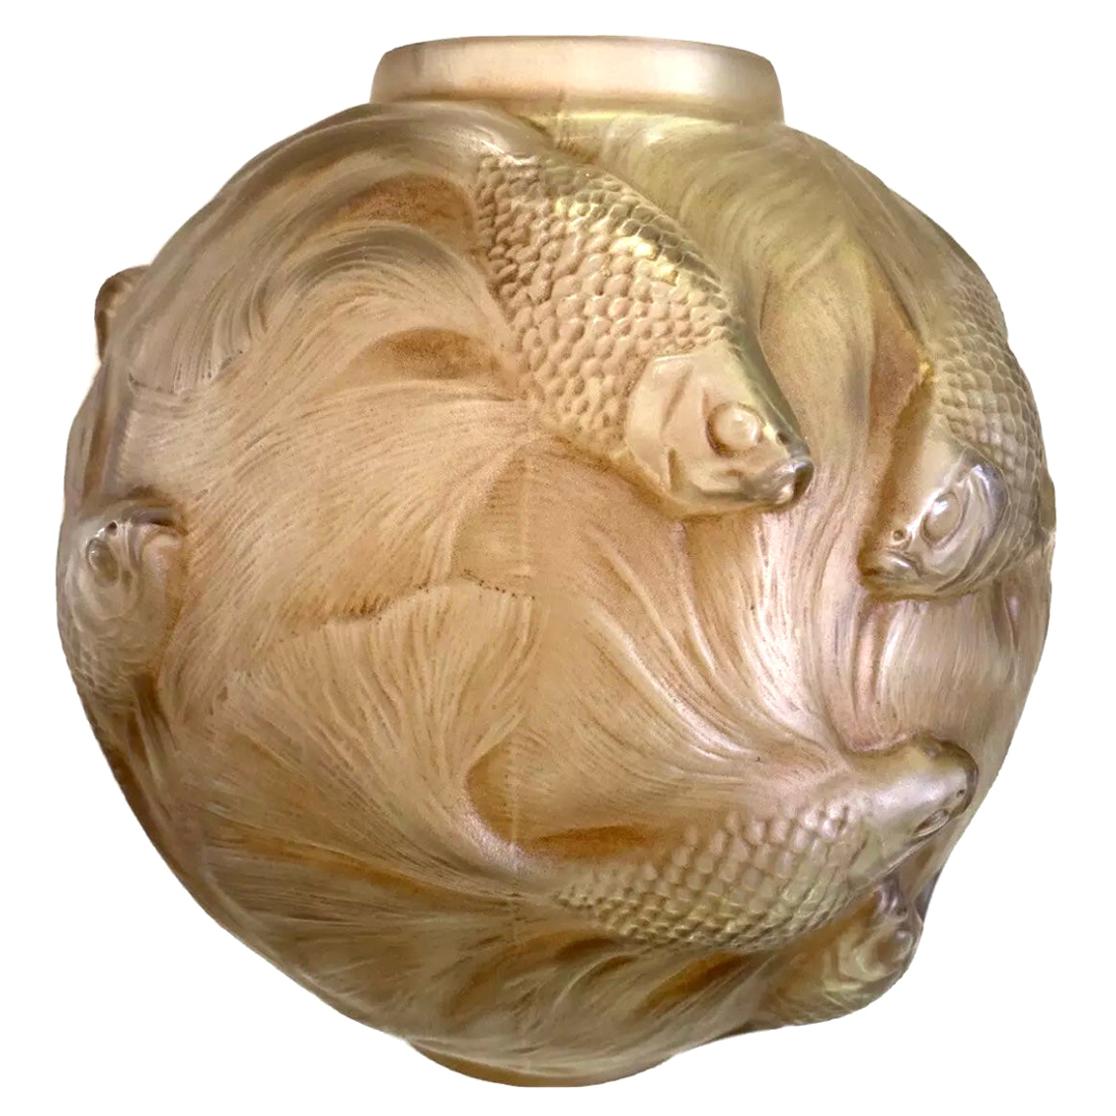 1924 René Lalique Formose Vase in Frosted Glass with Sepia Stain, Fishes